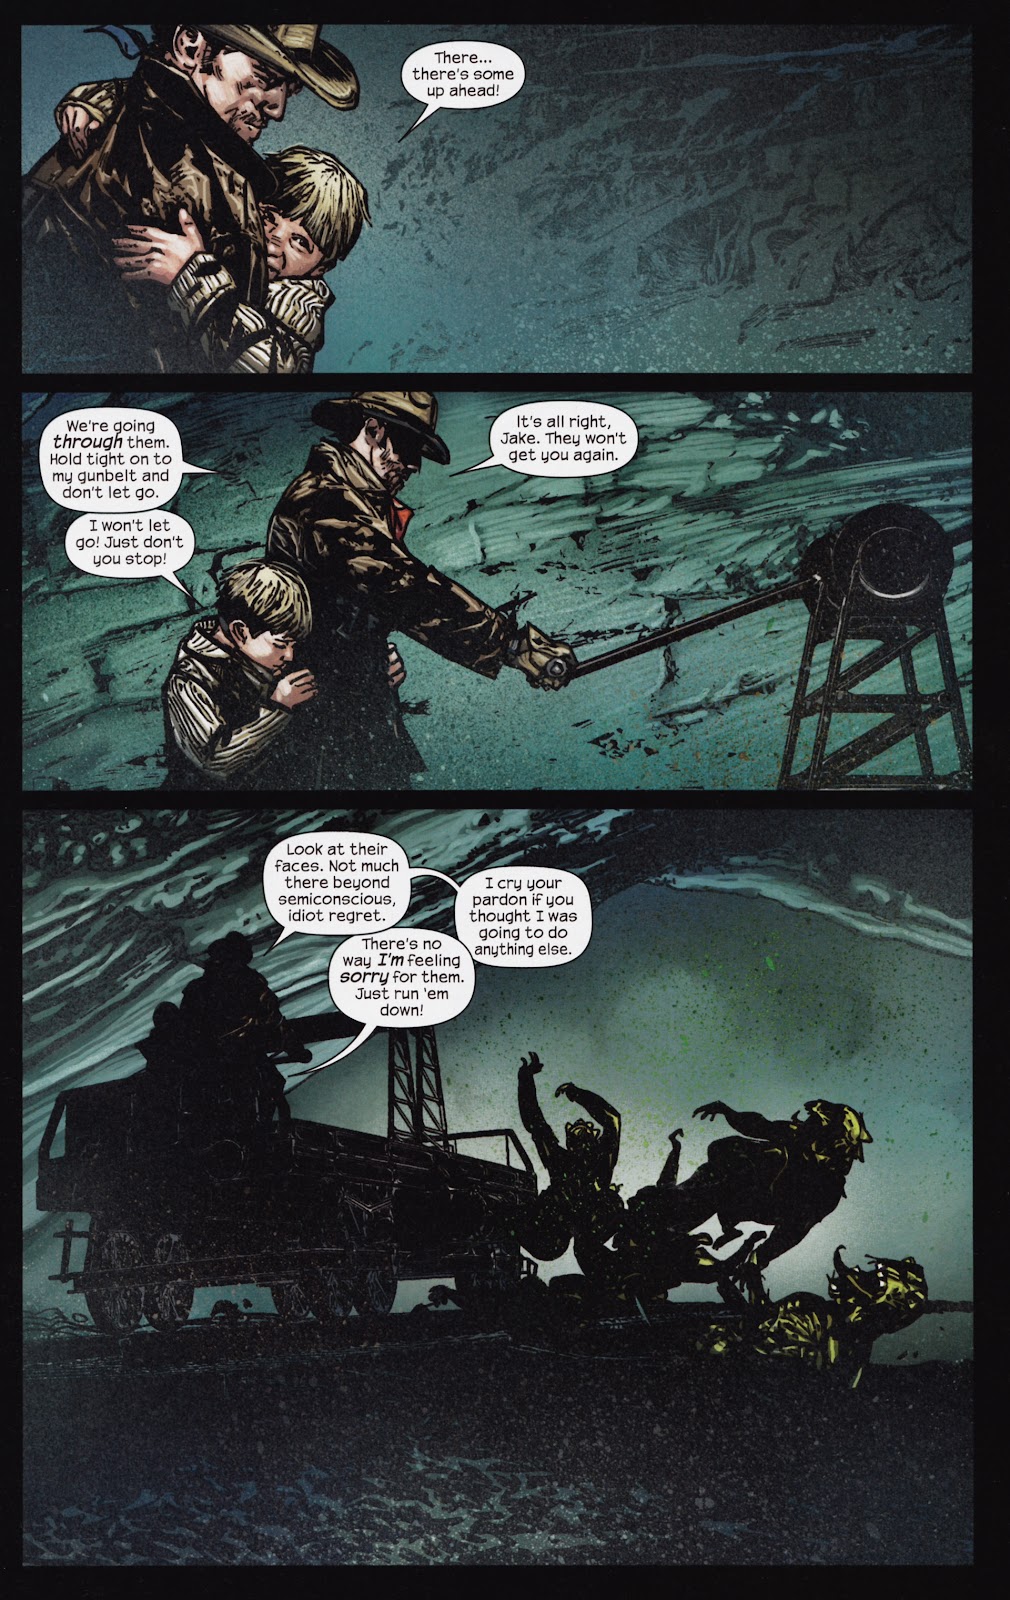 Dark Tower: The Gunslinger - The Man in Black issue 3 - Page 8